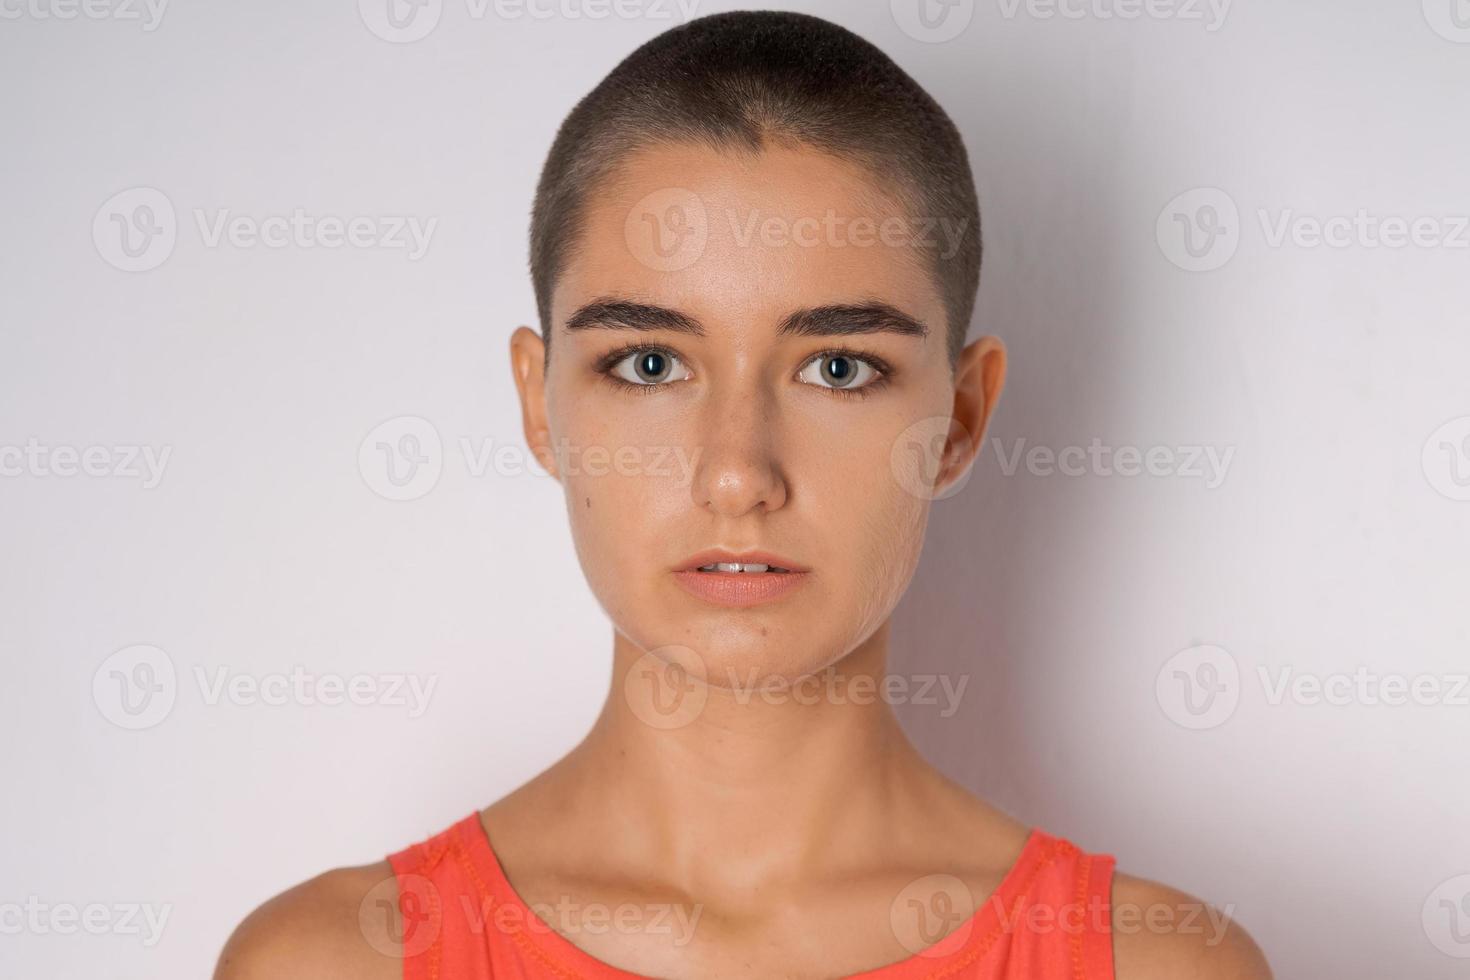 Caucasian young woman with shaved head. Young woman looking into the camera photo